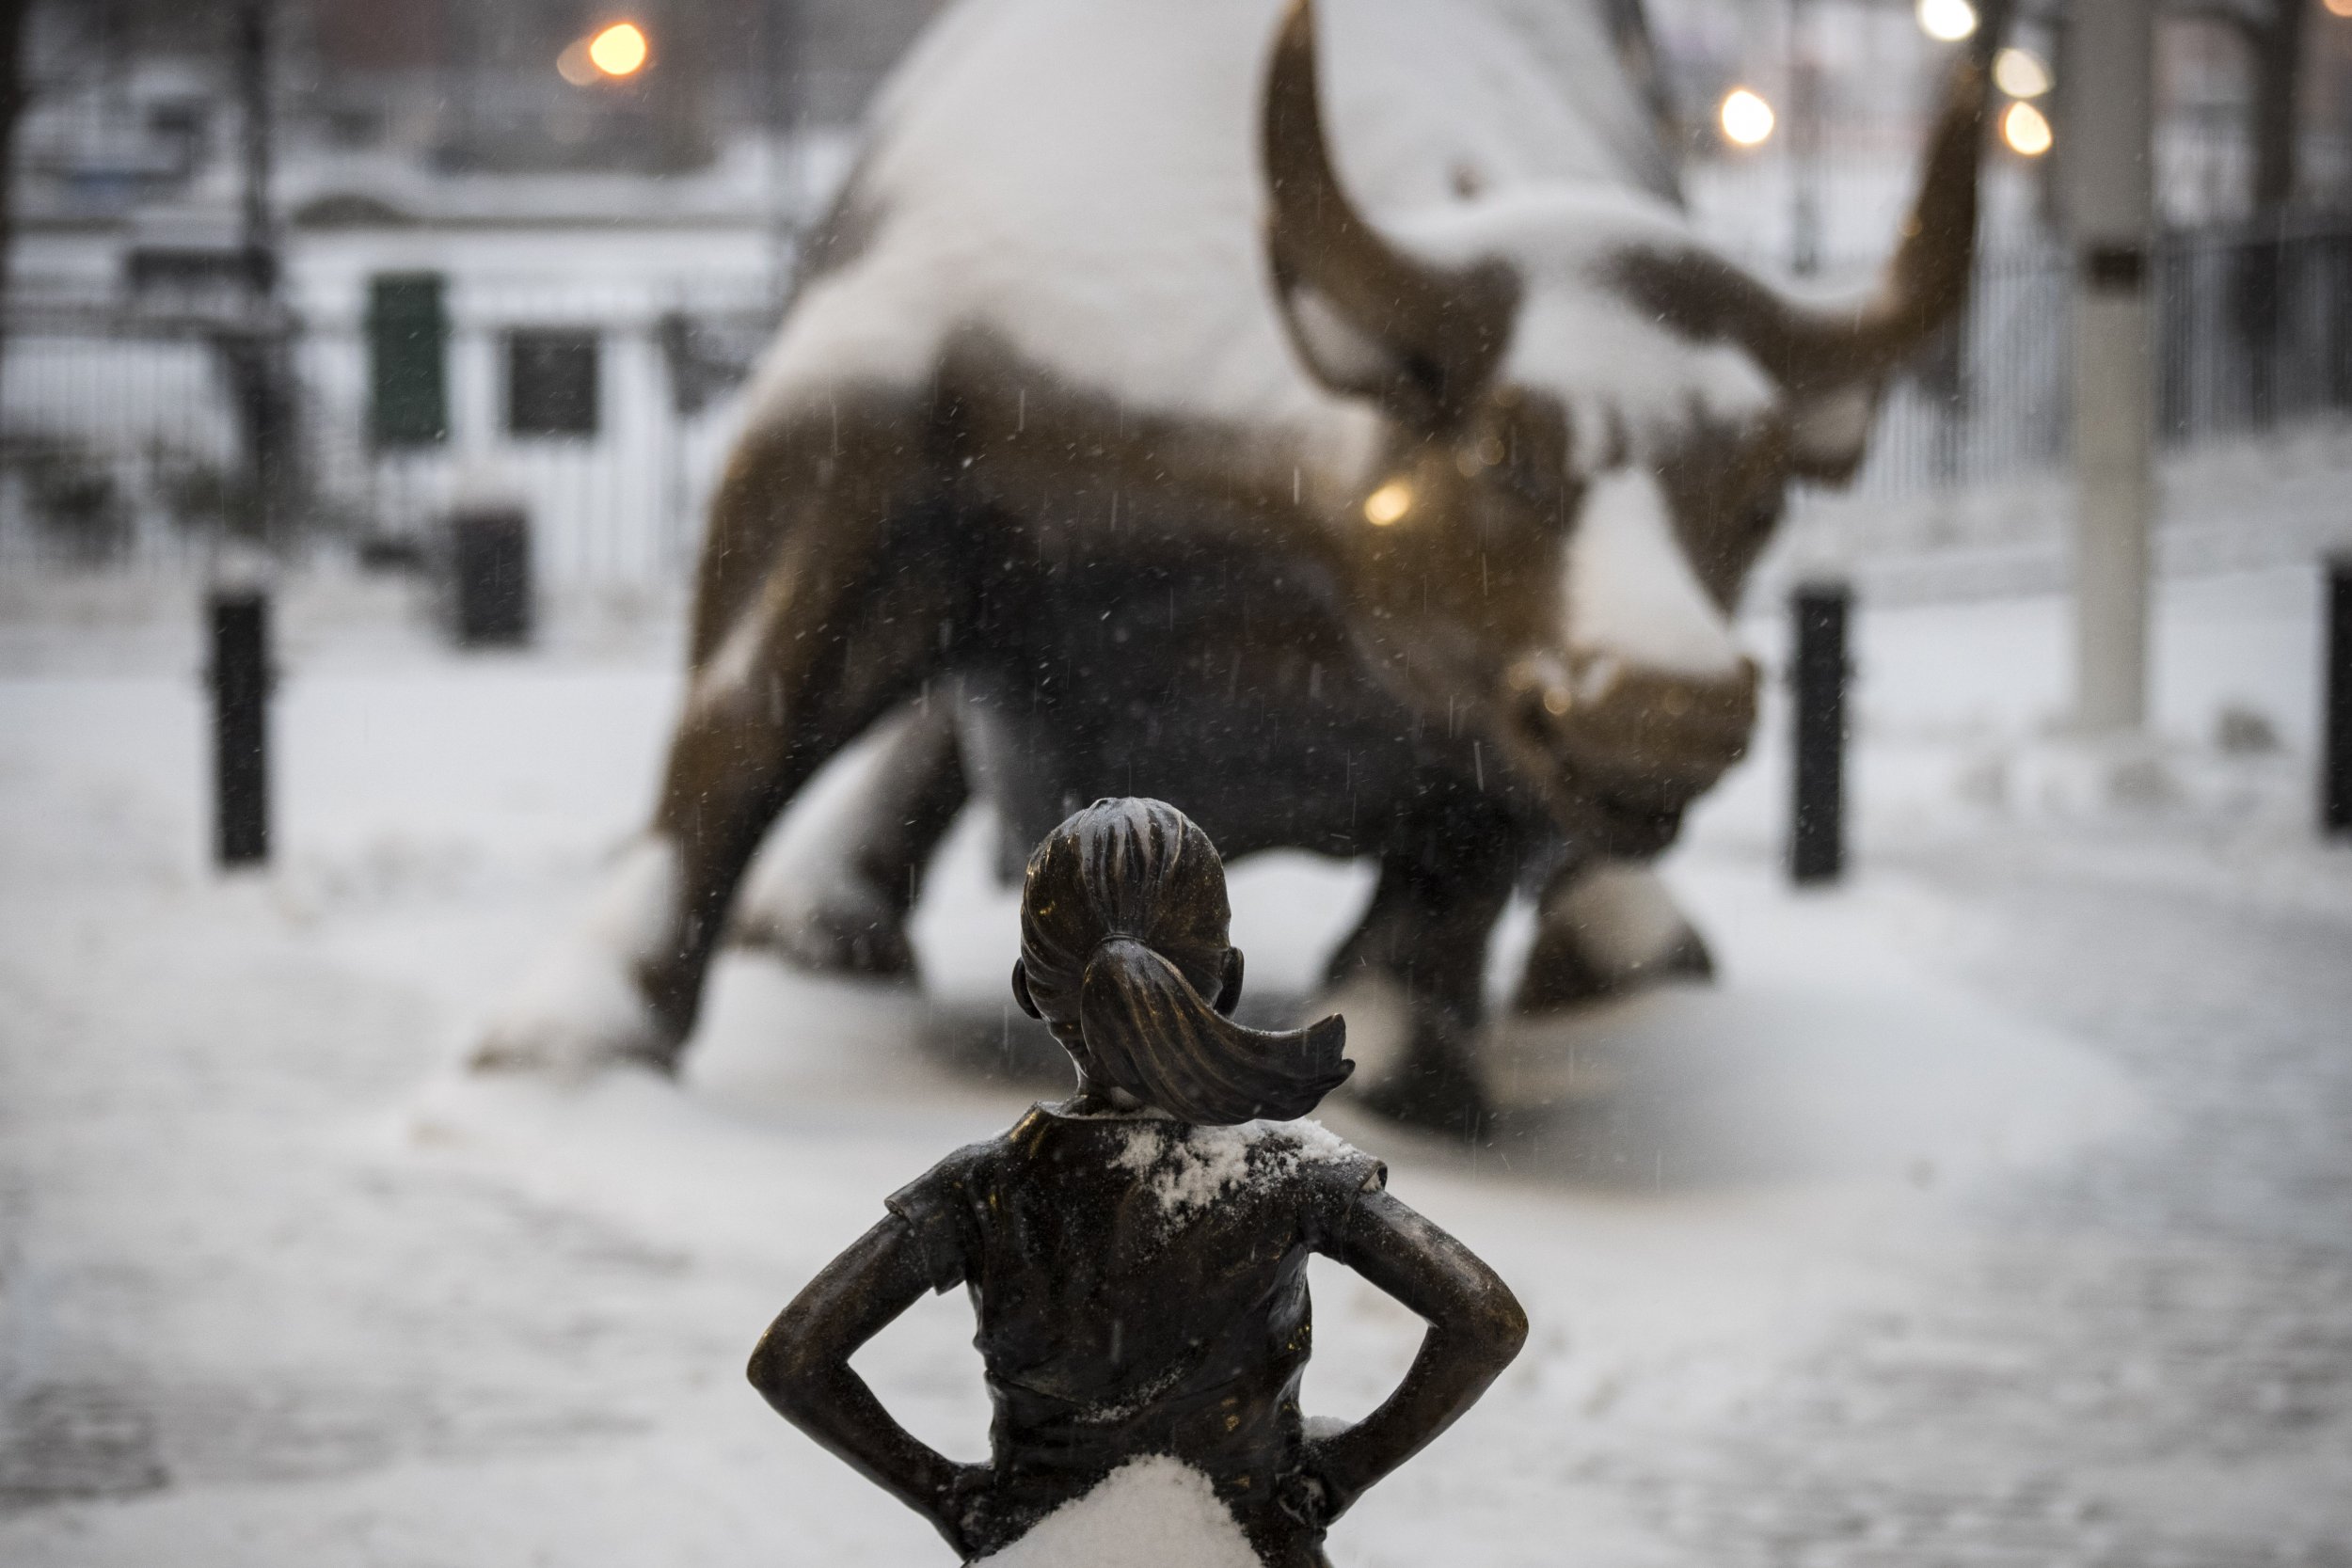 New York's 'Fearless Girl' statue